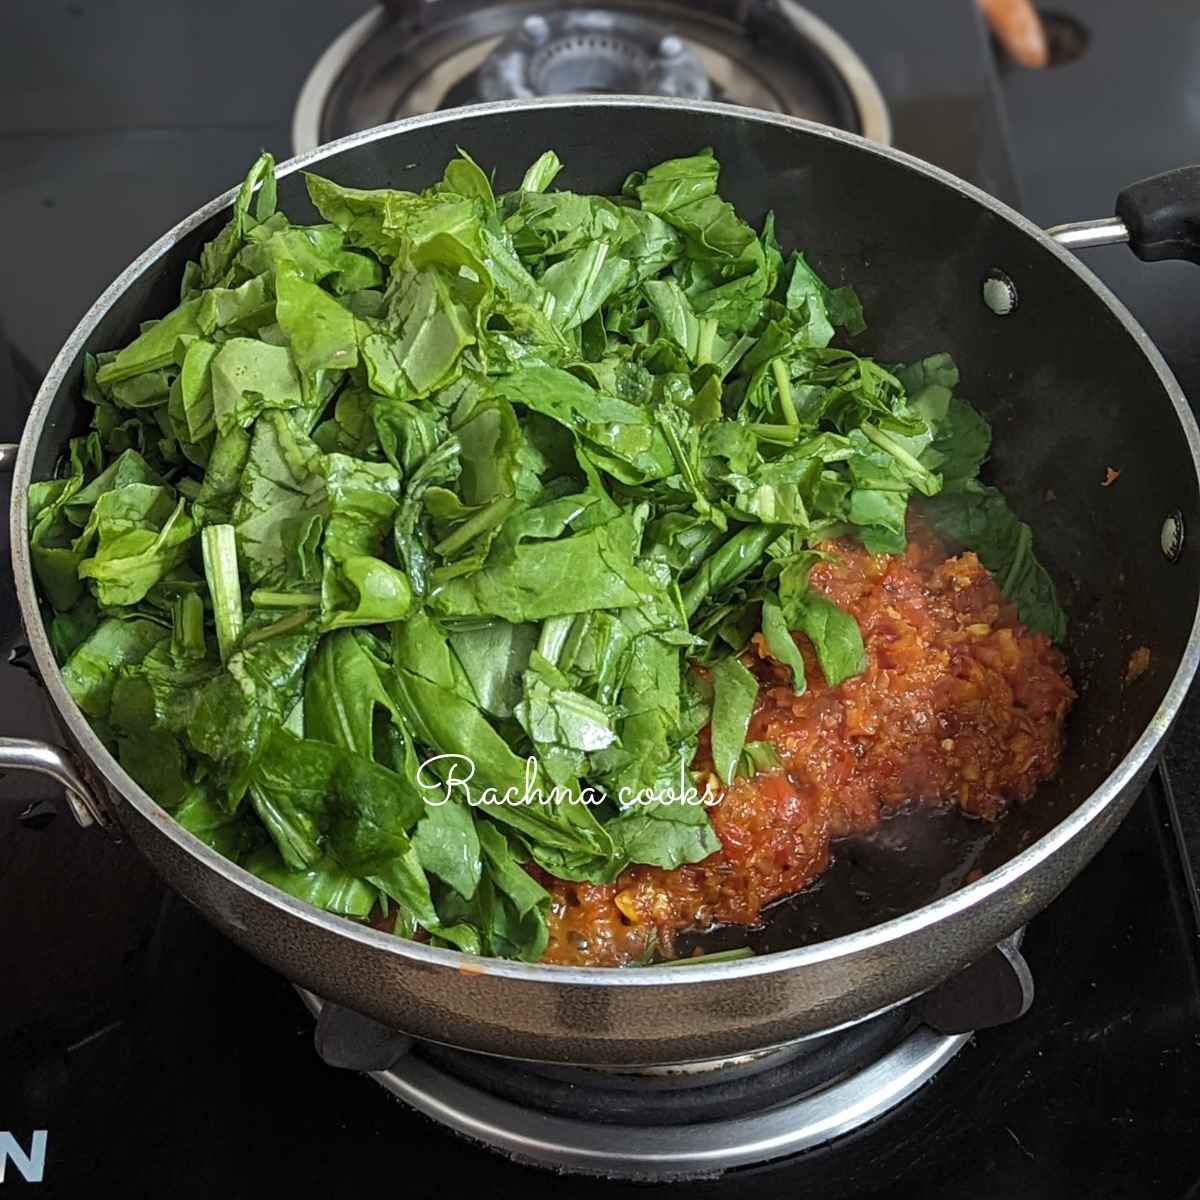 Chopped spinach added to the onion tomato mash